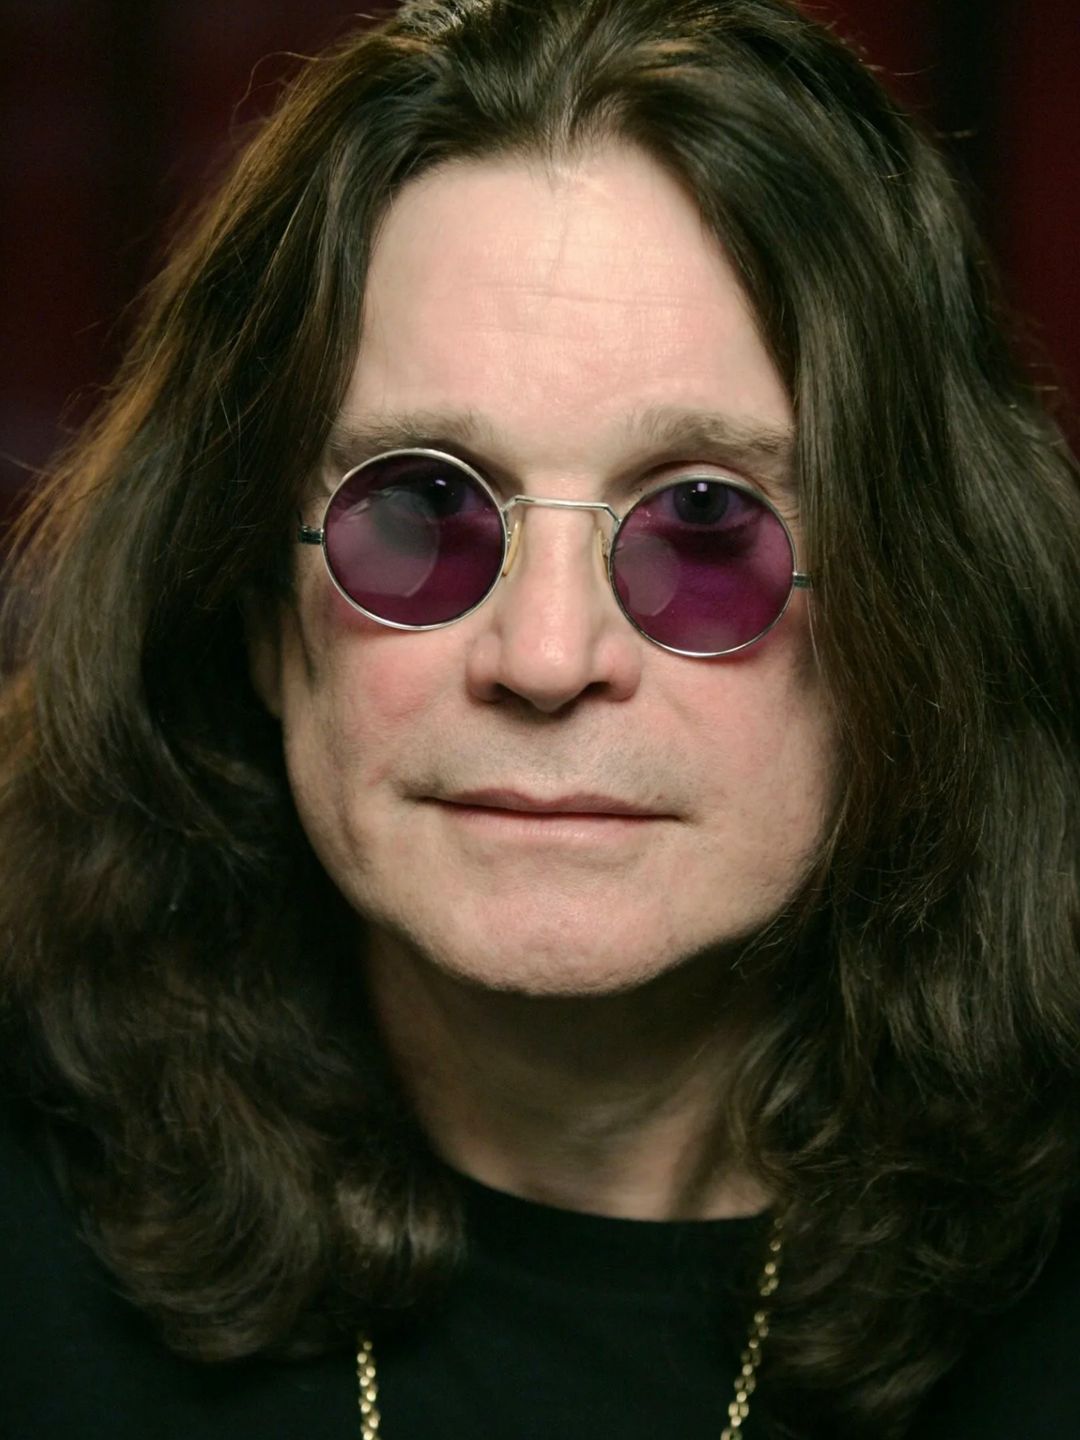 Ozzy Osbourne young age